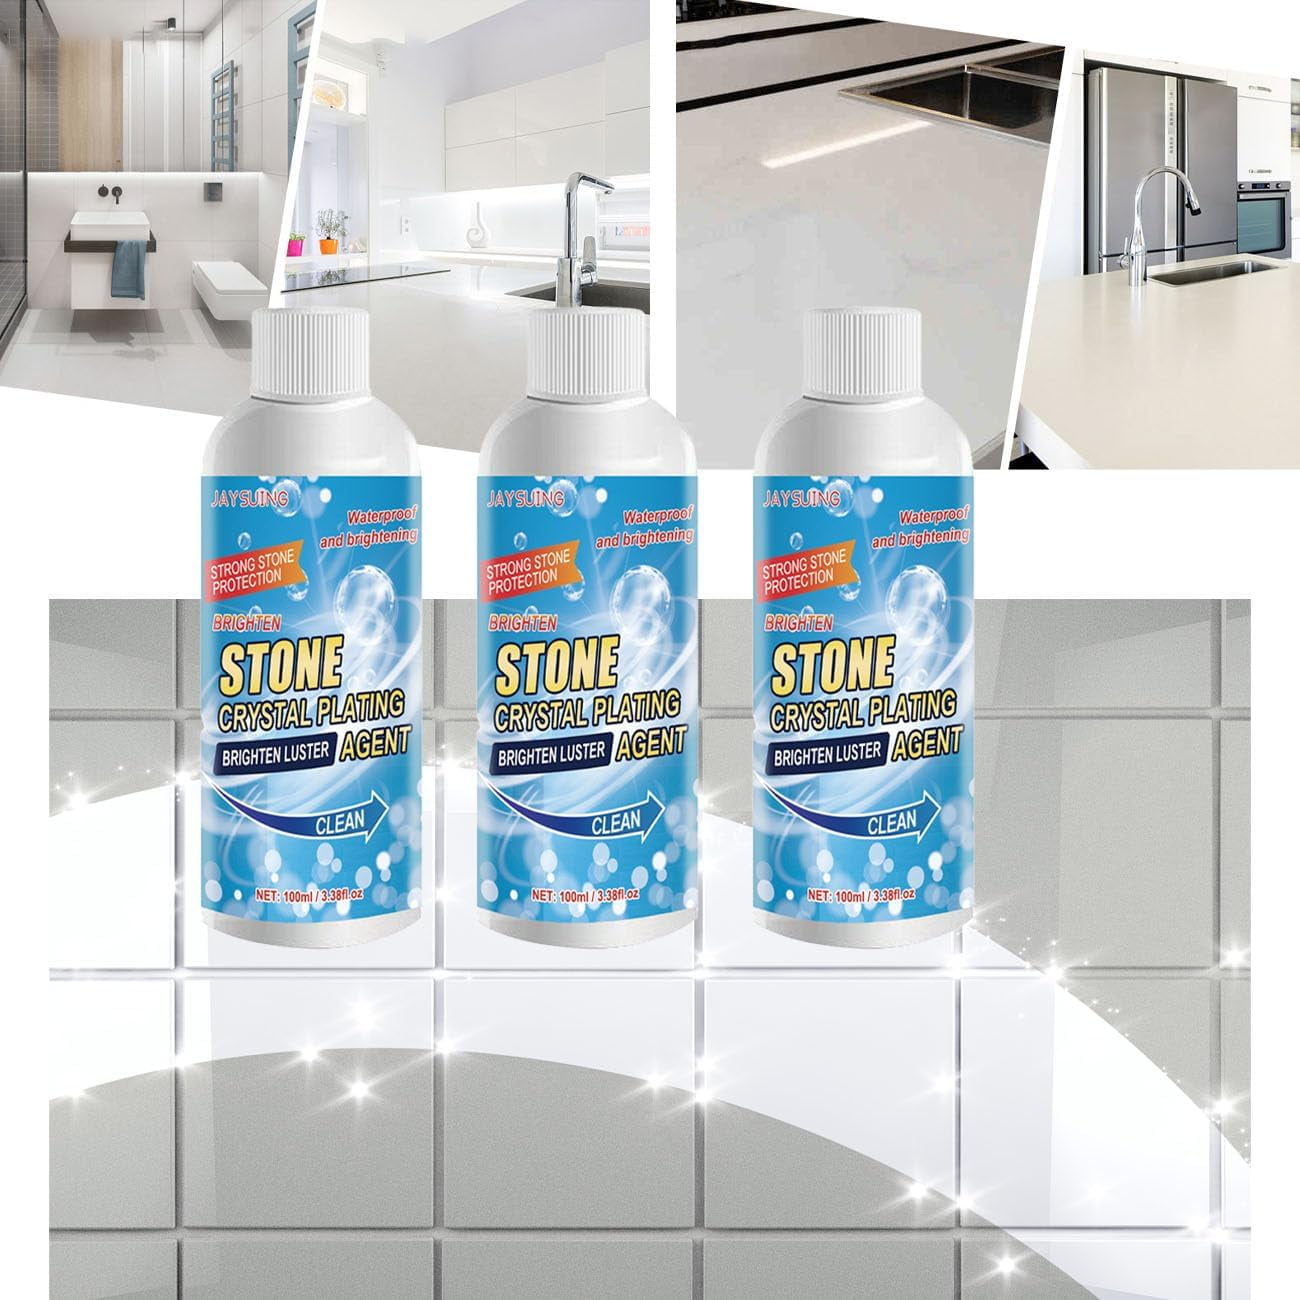  Stone Stain Remover Cleaner, Nano Stone Crystal Plating Agent, Quartz  countertop Stain Remover, Stone Crystal Plating Agent Polish for Patio  Kitchen, Backyard Marble Cleaner (2pc) : Health & Household